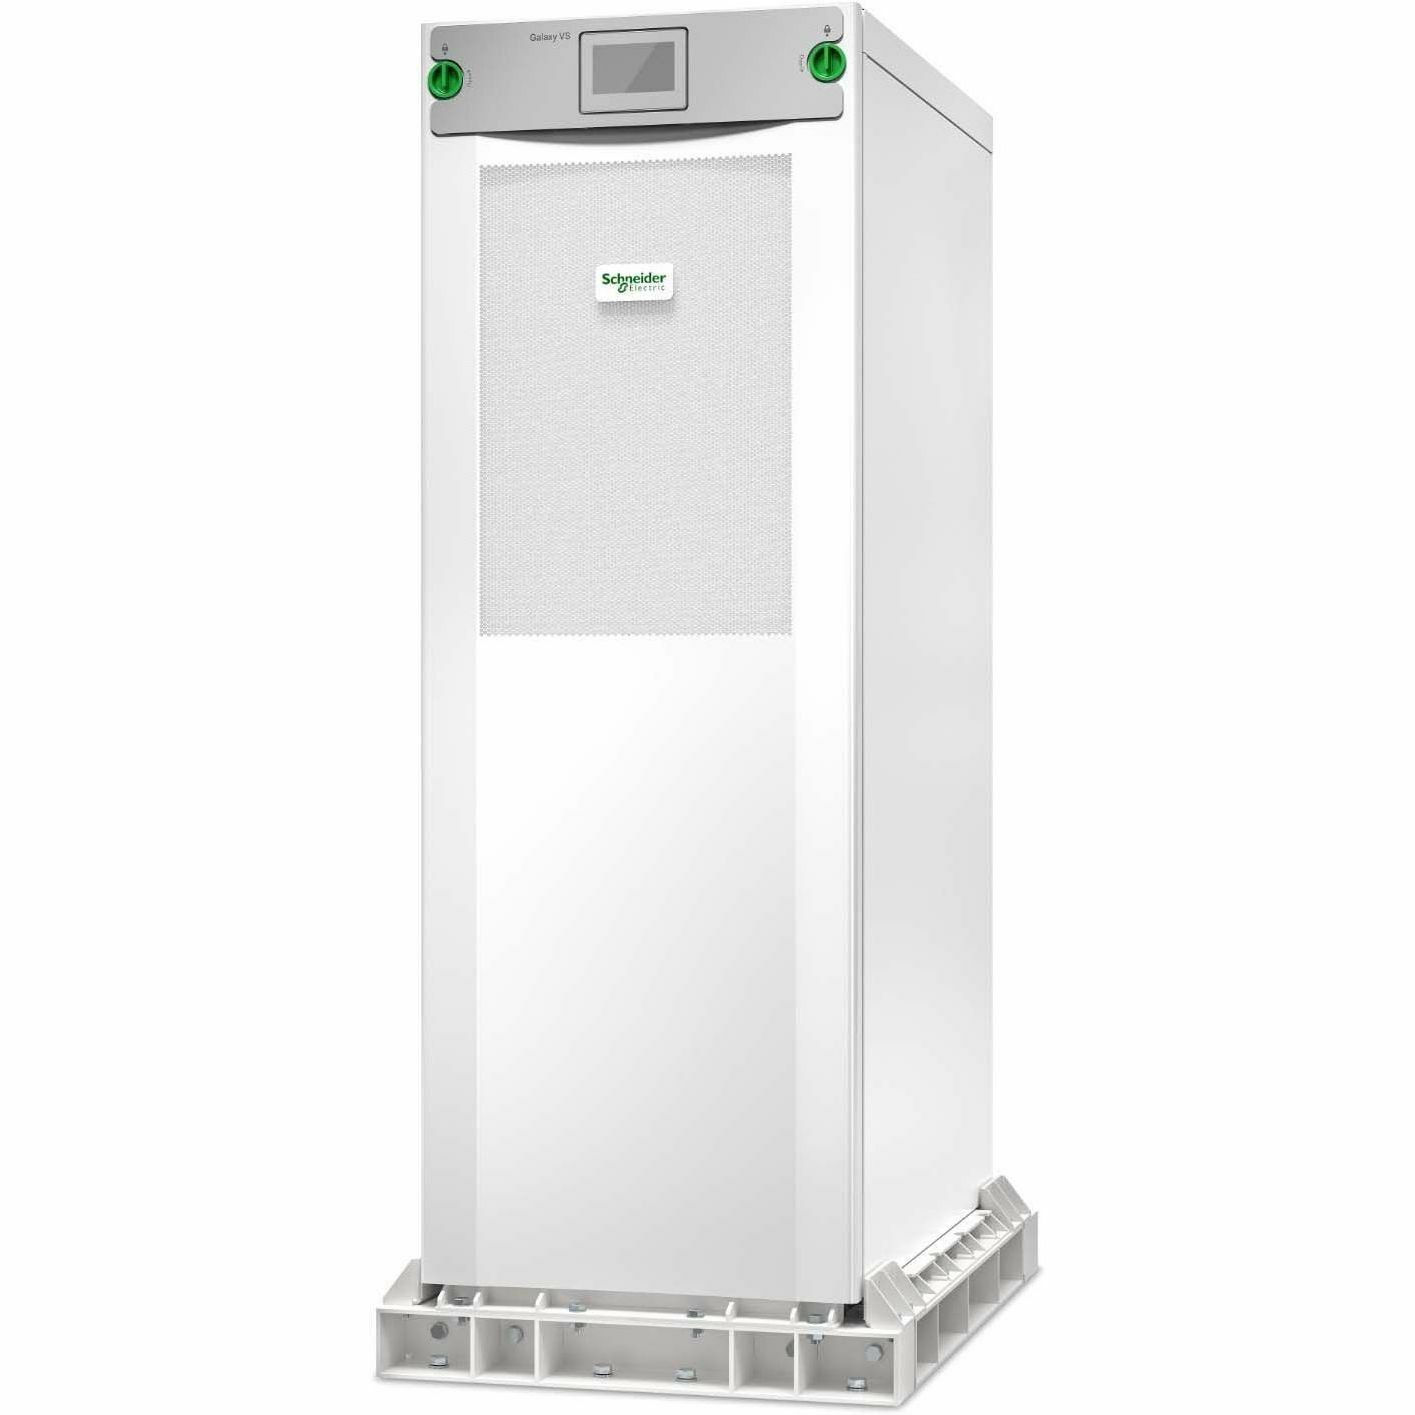 APC by Schneider Electric Galaxy VS Double Conversion Online UPS - 100 kVA/100 kW - Three Phase